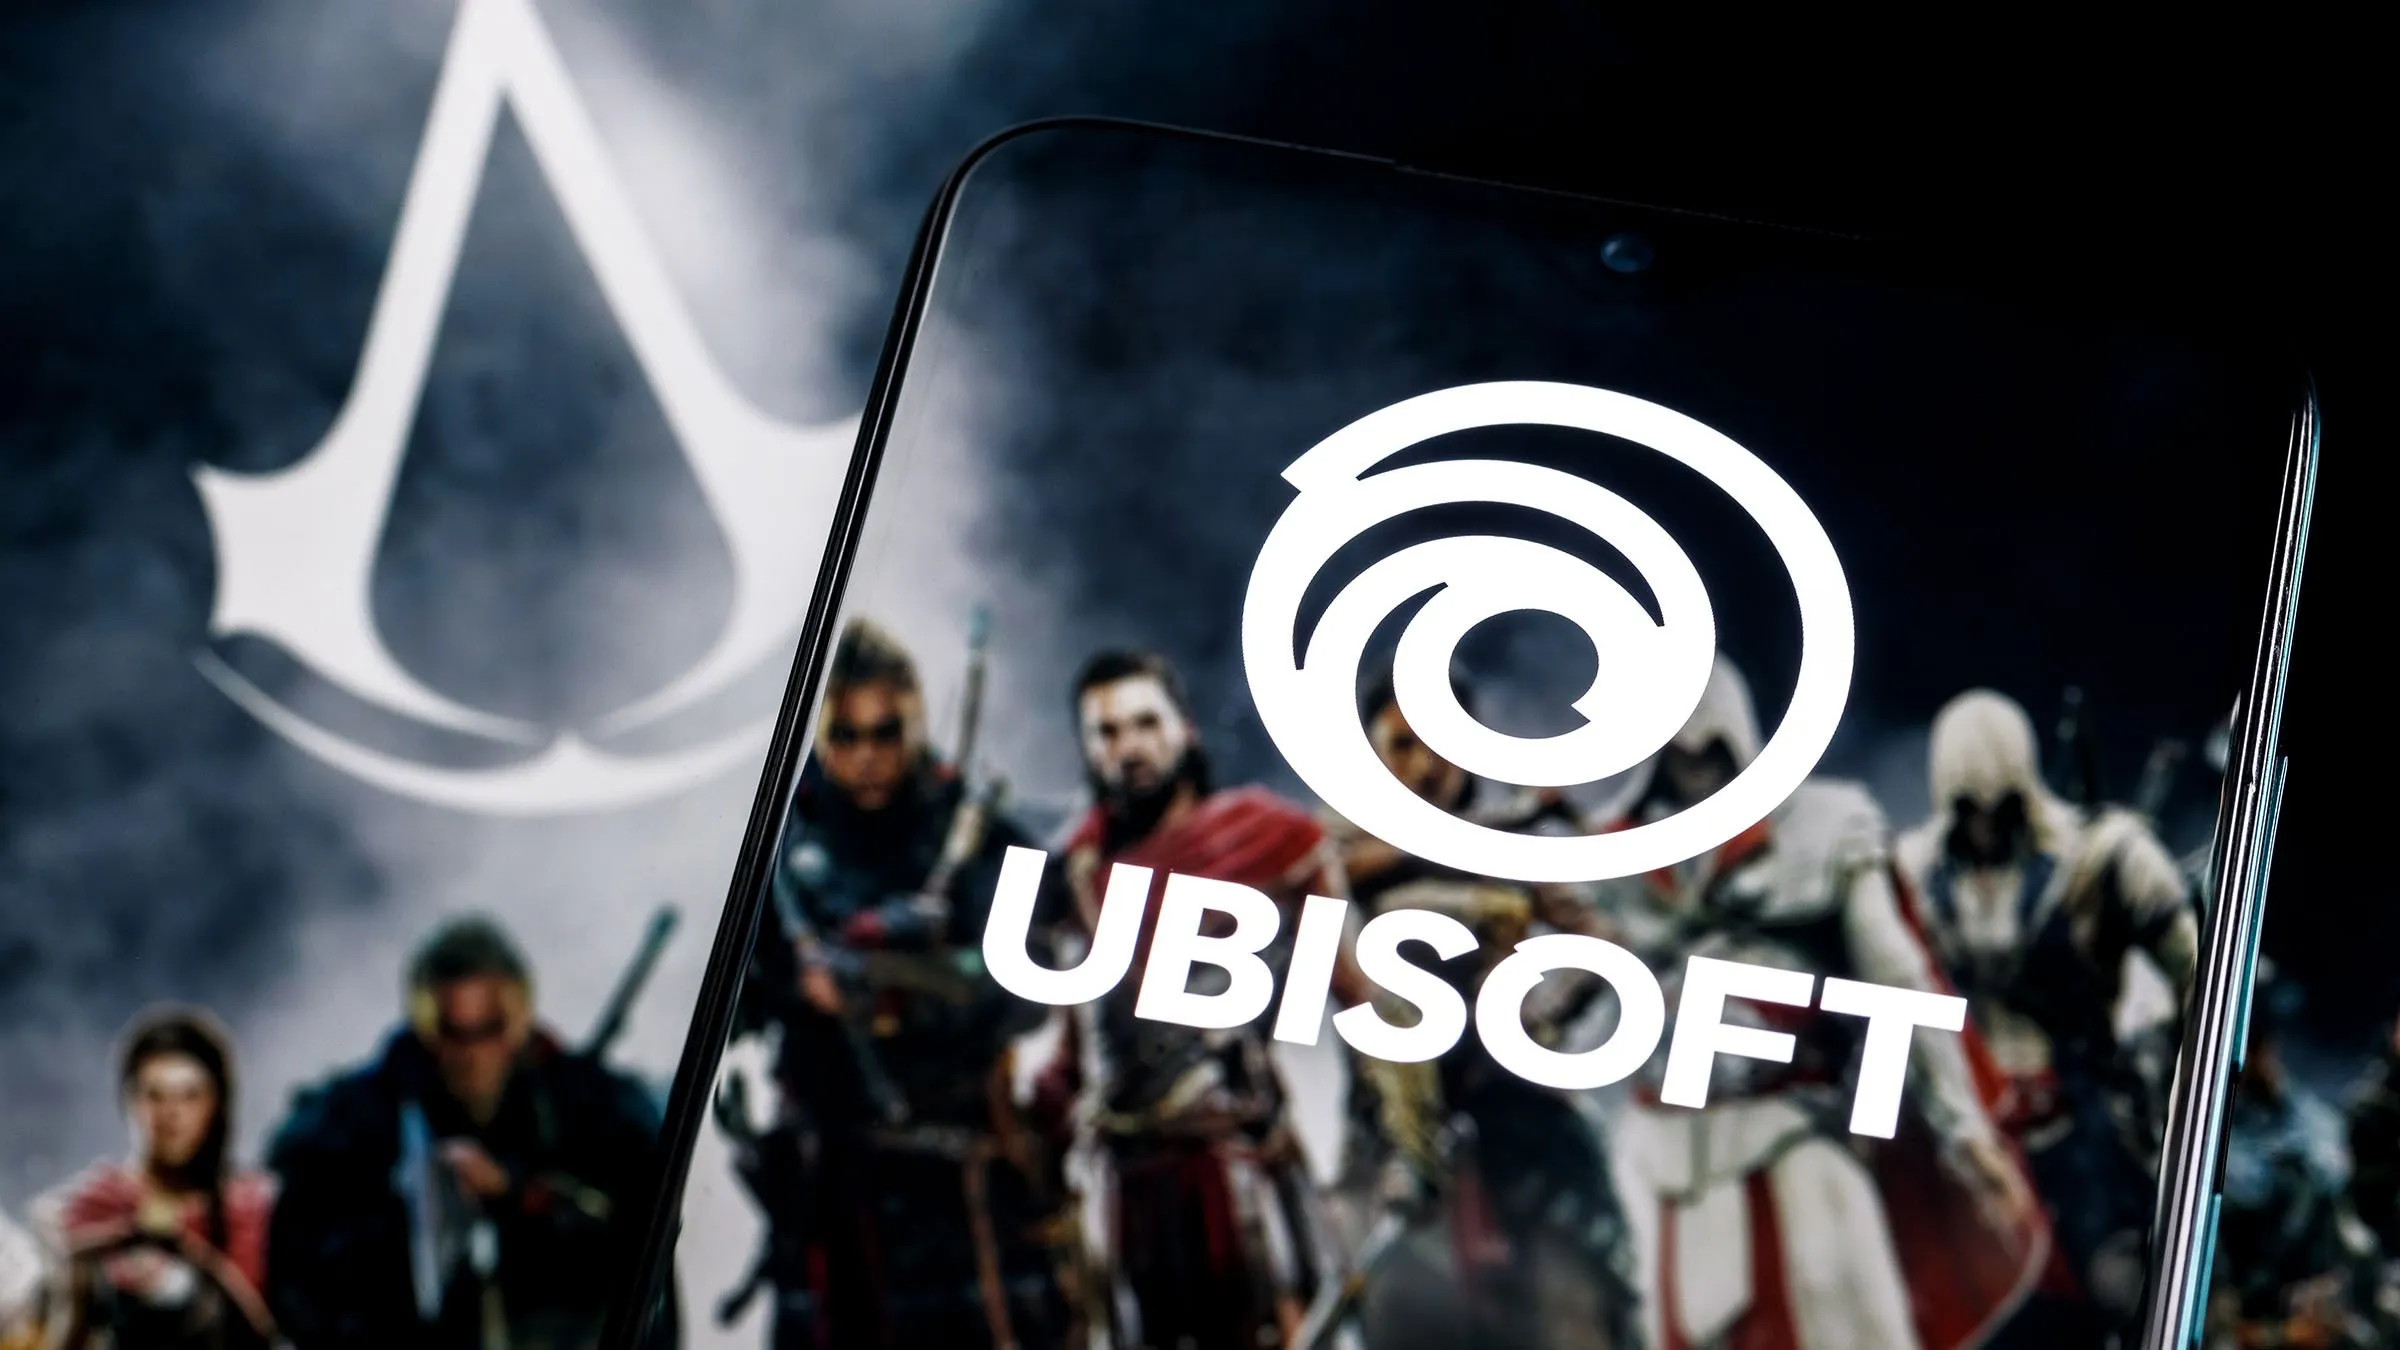 Ubisoft say now is the time for free-to-play games across all [their]  biggest franchises